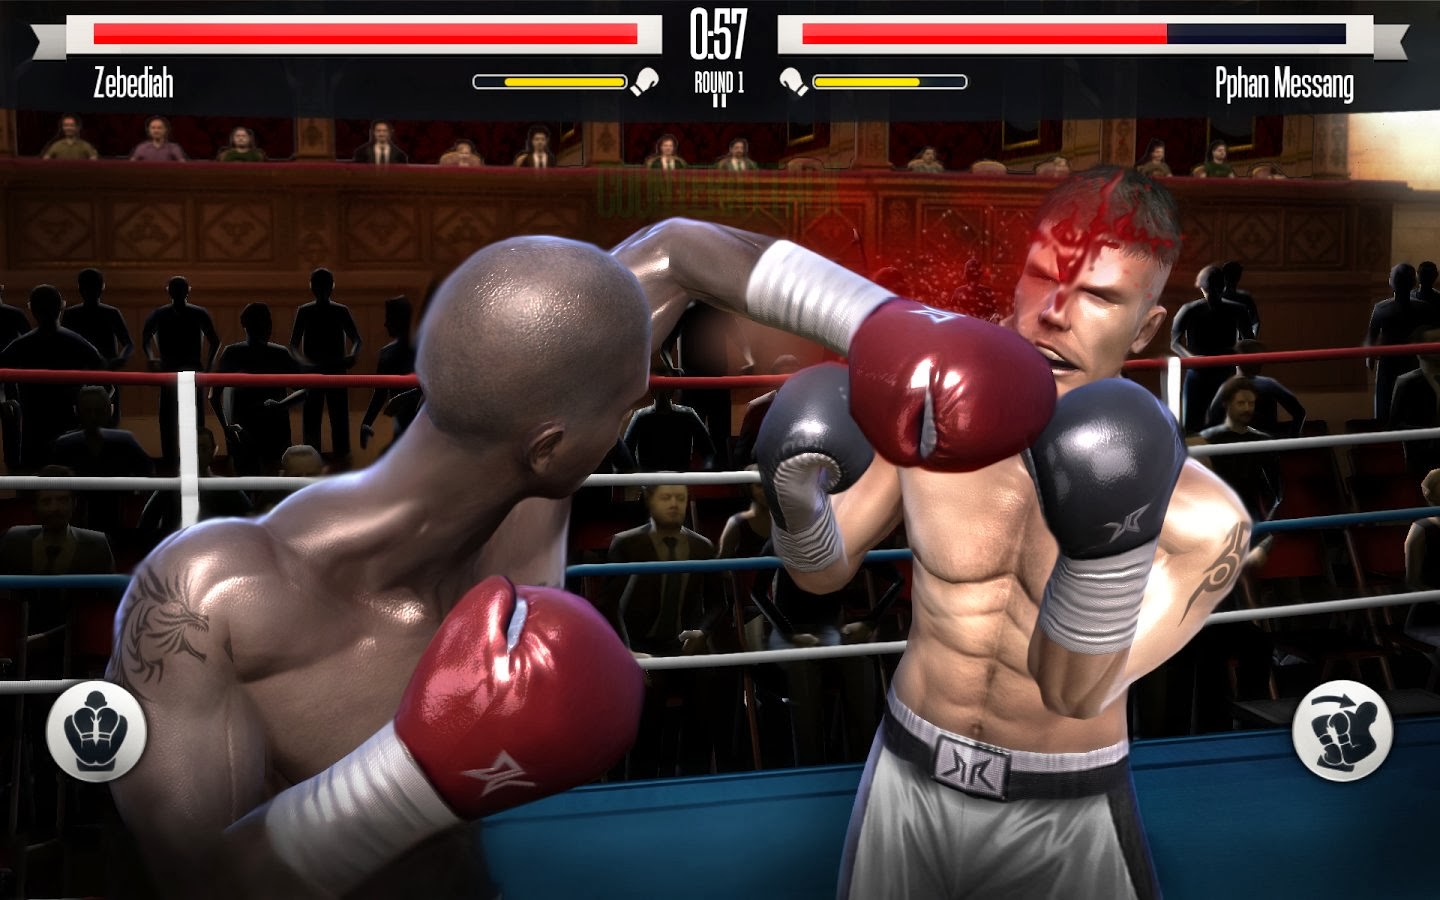 Untilited boxing game